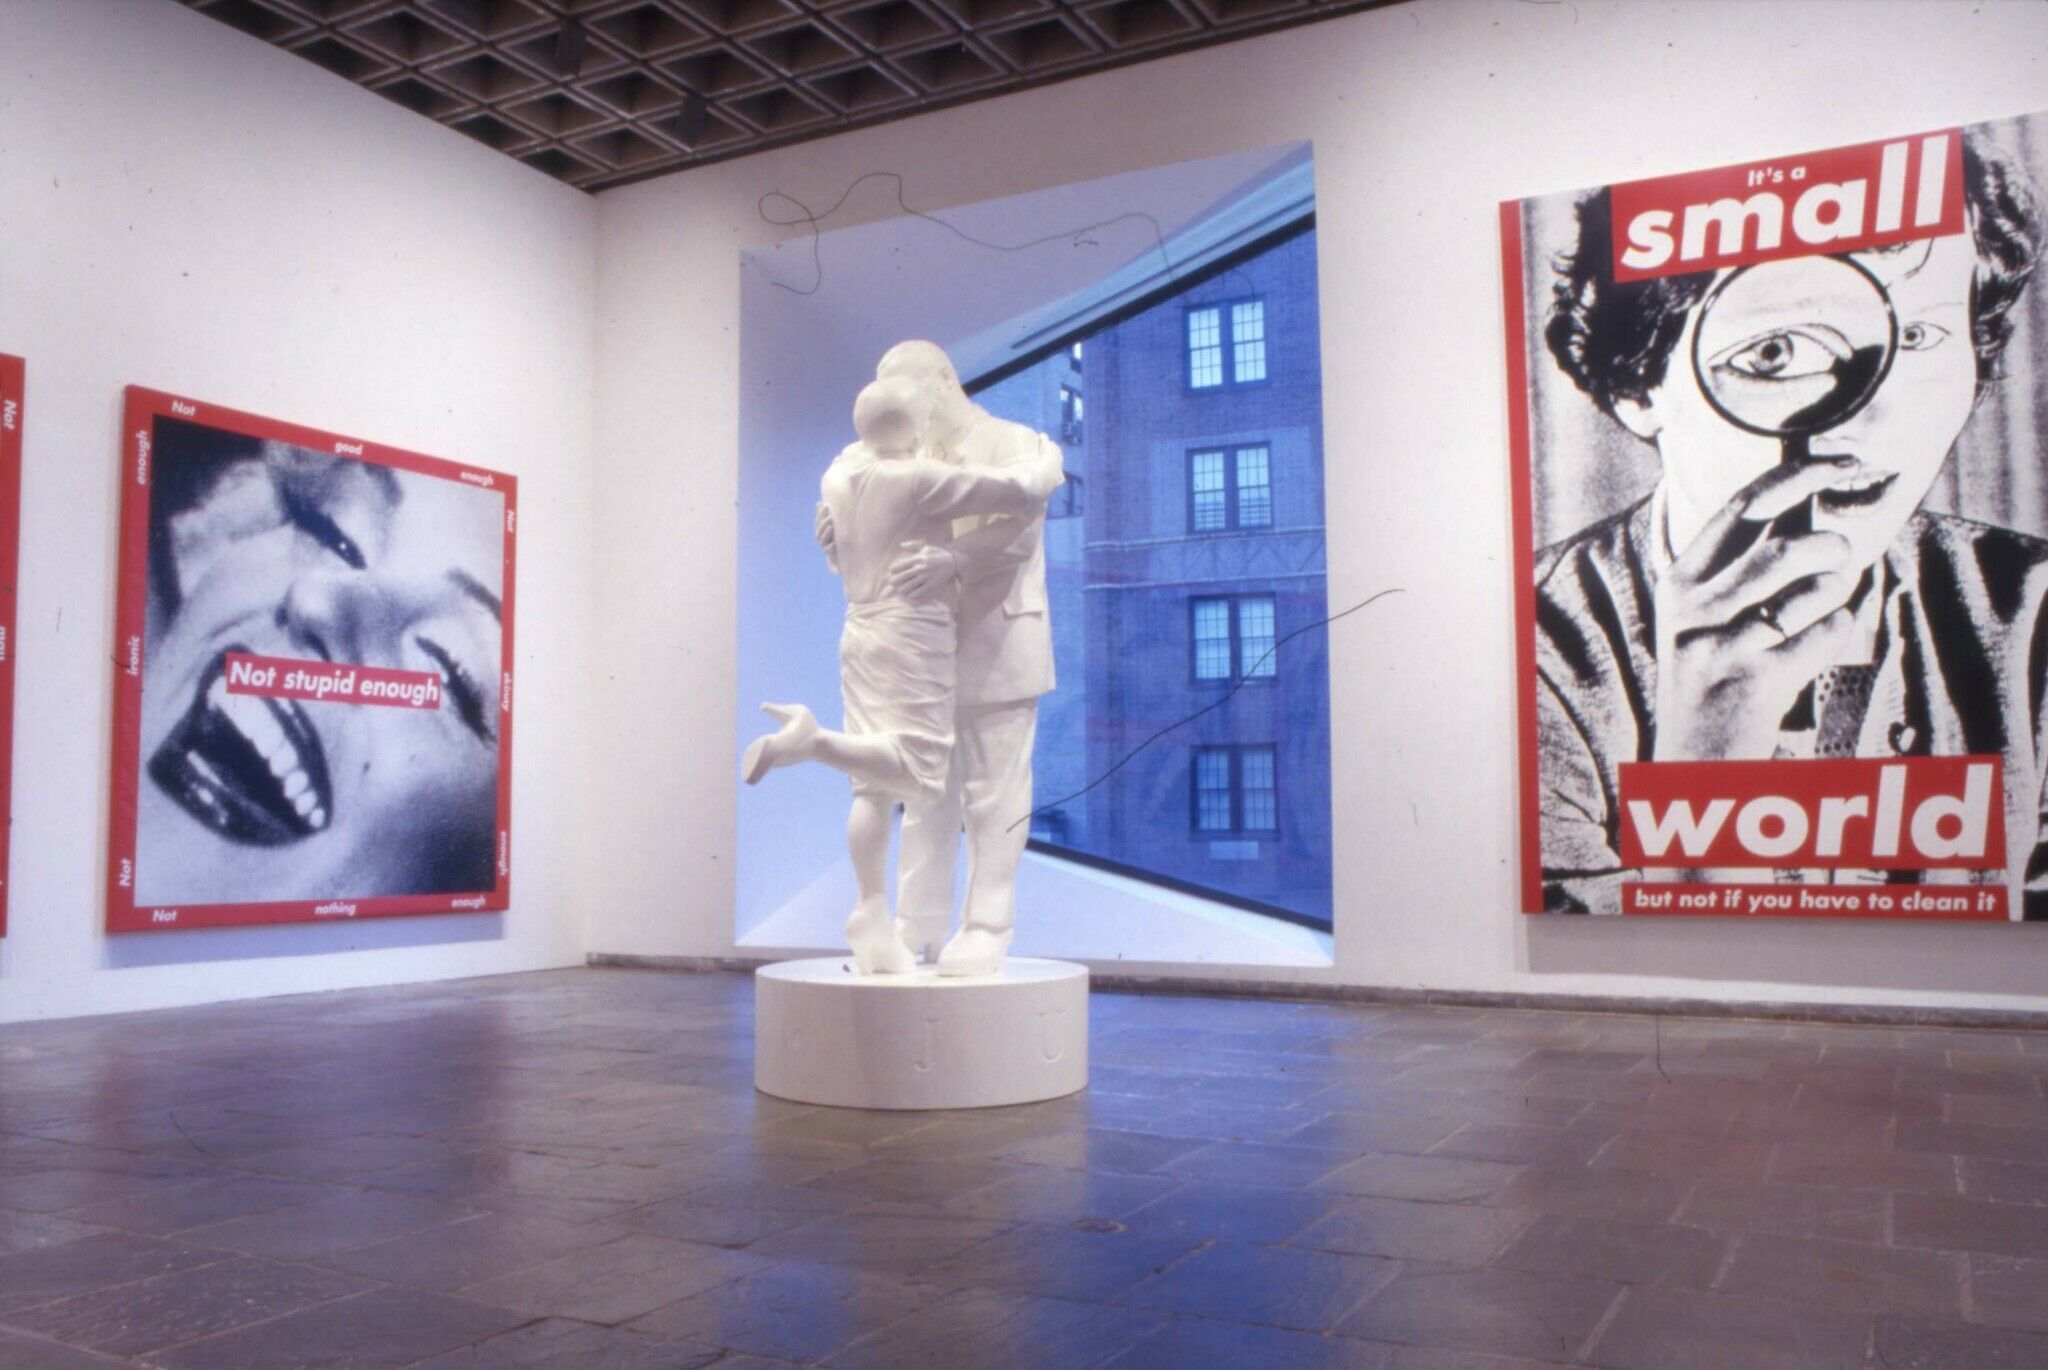 A white sculpture of two figures kissing, displayed in a gallery along with other works of art.